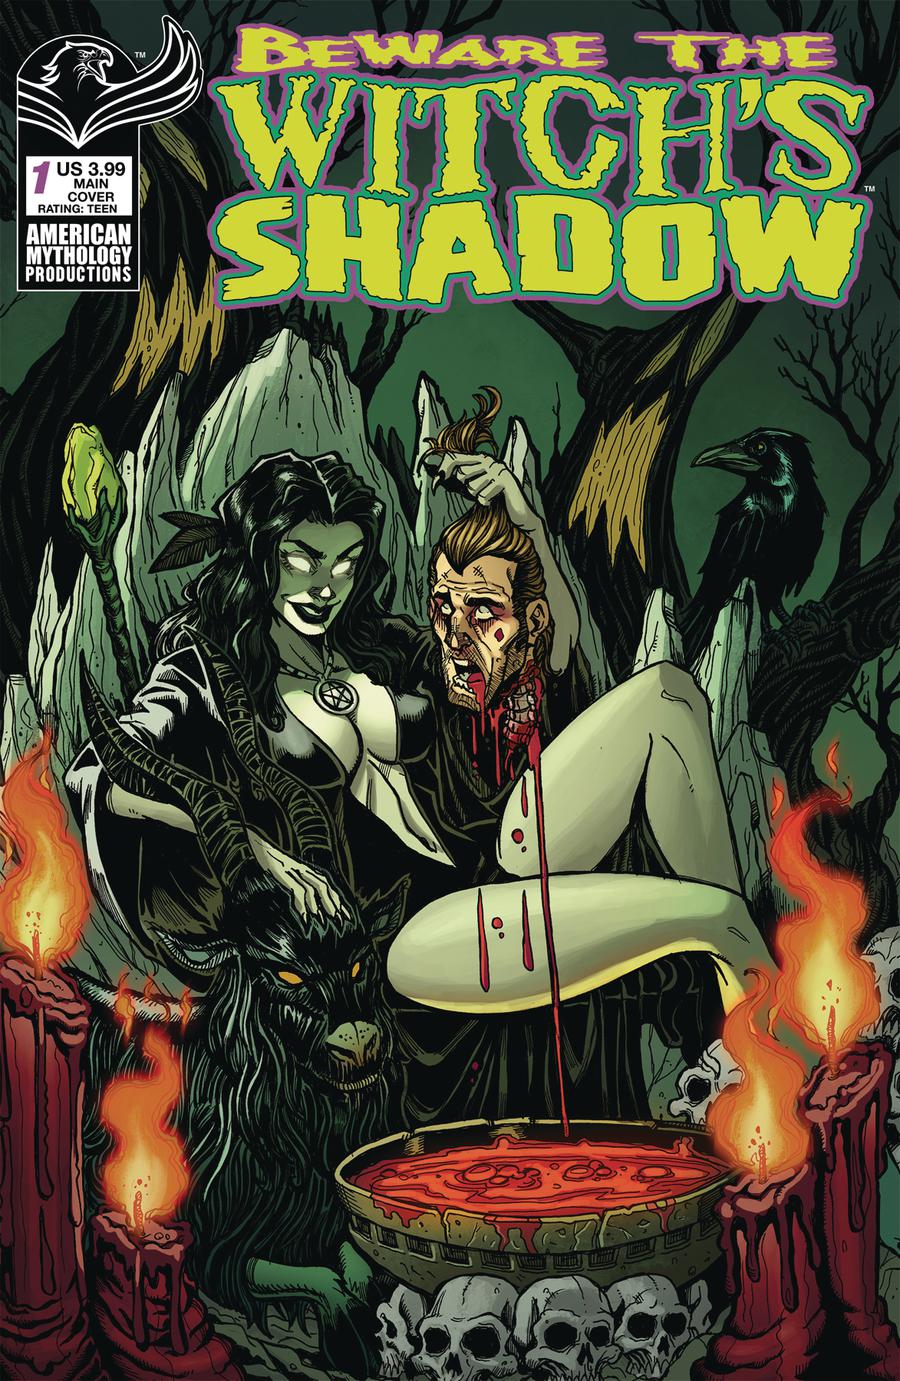 Beware The Witchs Shadow #1 Cover A Regular Puis Calzada Cover